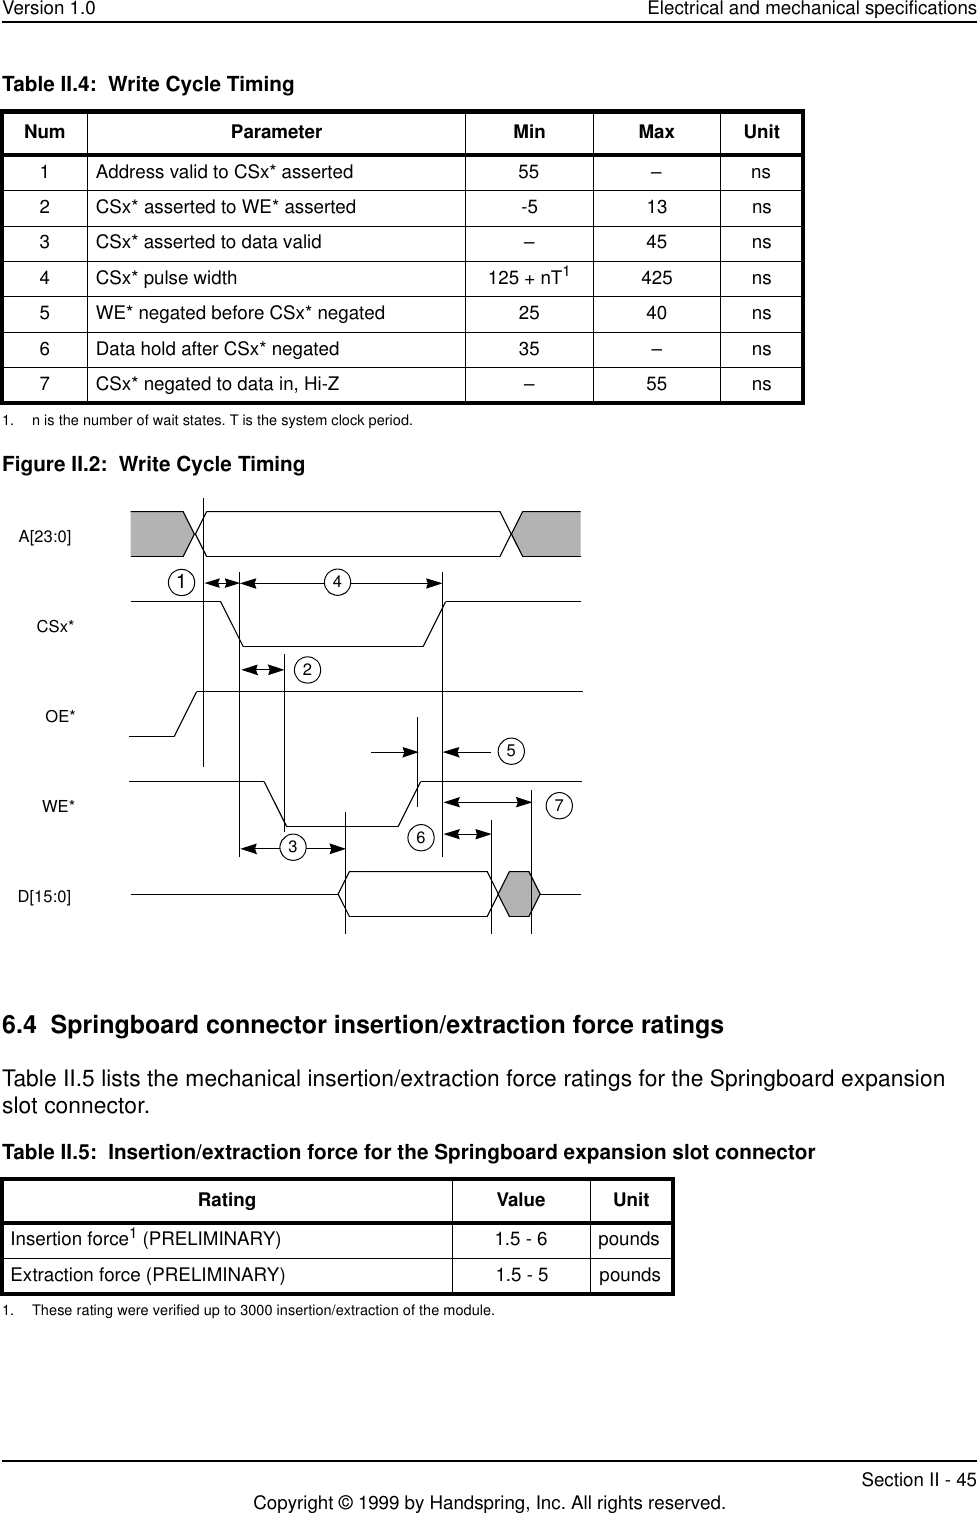 Version 1.0 Electrical and mechanical specificationsSection II - 45Copyright © 1999 by Handspring, Inc. All rights reserved.Figure II.2:  Write Cycle Timing6.4  Springboard connector insertion/extraction force ratingsTable II.5 lists the mechanical insertion/extraction force ratings for the Springboard expansion slot connector.Table II.4:  Write Cycle TimingNum Parameter Min Max Unit1 Address valid to CSx* asserted 55 – ns2 CSx* asserted to WE* asserted -5 13 ns3 CSx* asserted to data valid – 45 ns4 CSx* pulse width 125 + nT1425 ns 5 WE* negated before CSx* negated 25 40 ns 6 Data hold after CSx* negated 35 – ns 7 CSx* negated to data in, Hi-Z – 55 ns 1. n is the number of wait states. T is the system clock period.Table II.5:  Insertion/extraction force for the Springboard expansion slot connectorRating Value UnitInsertion force1 (PRELIMINARY)1. These rating were verified up to 3000 insertion/extraction of the module.1.5 - 6 poundsExtraction force (PRELIMINARY) 1.5 - 5 poundsA[23:0]CSx*OE*WE*D[15:0]3214675